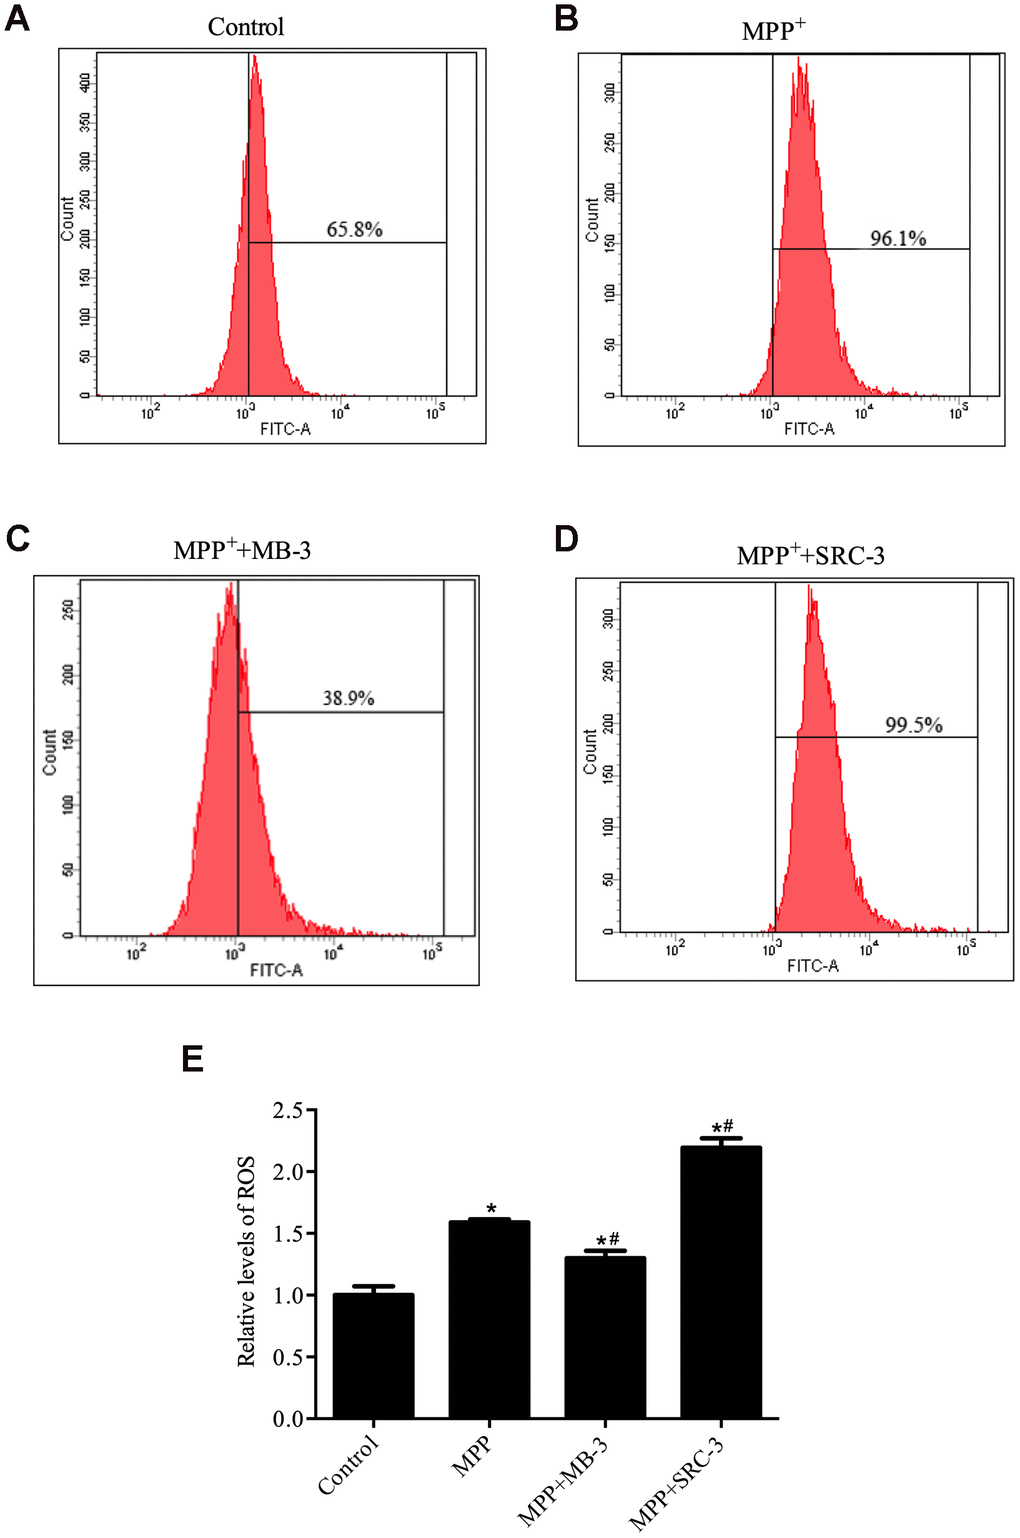 ROS production was regulated by GCN5 in MPP+-treated cell model. (A) Relative levels of ROS in control group; (B) Relative levels of ROS in cells treated with MPP+ (1000 μM), (C) Relative levels of ROS in cells treated with MPP+ (1000 μM) and MB-3 (50 μM); (D) Relative levels of ROS in cells treated with MPP+ (1000 μM) and SRC-3 (100 ng/mL). (E) Bar graph of relative levels of ROS; n=6, per group. *P vs. control group; # P vs. MPP+ group.